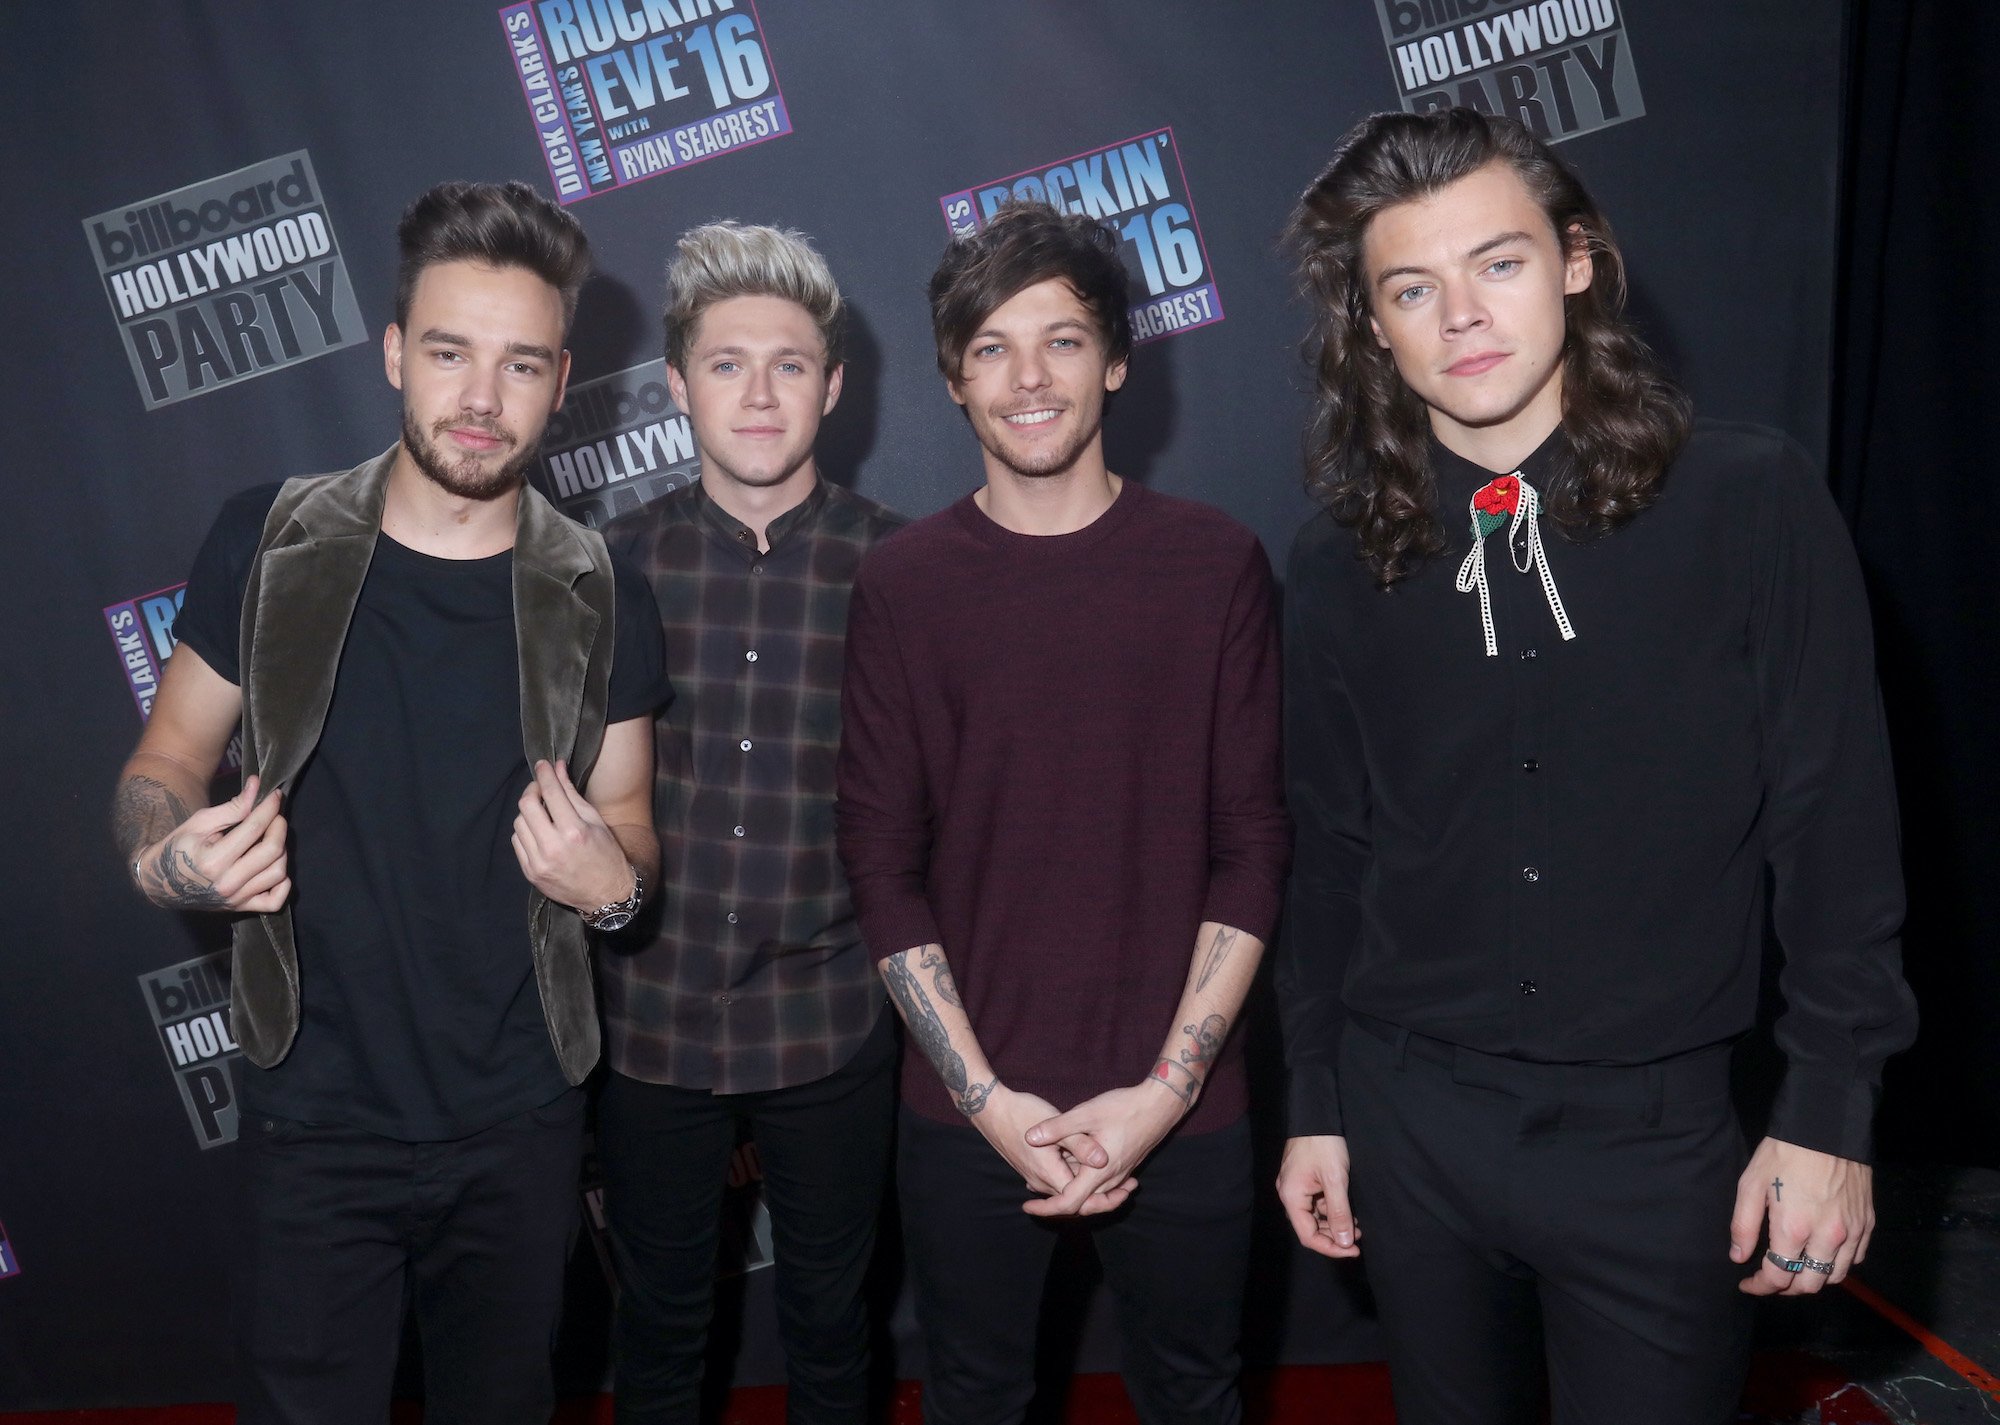 One Direction is linked to the 2021 Grammys in 1 way that doesn't include Harry Styles